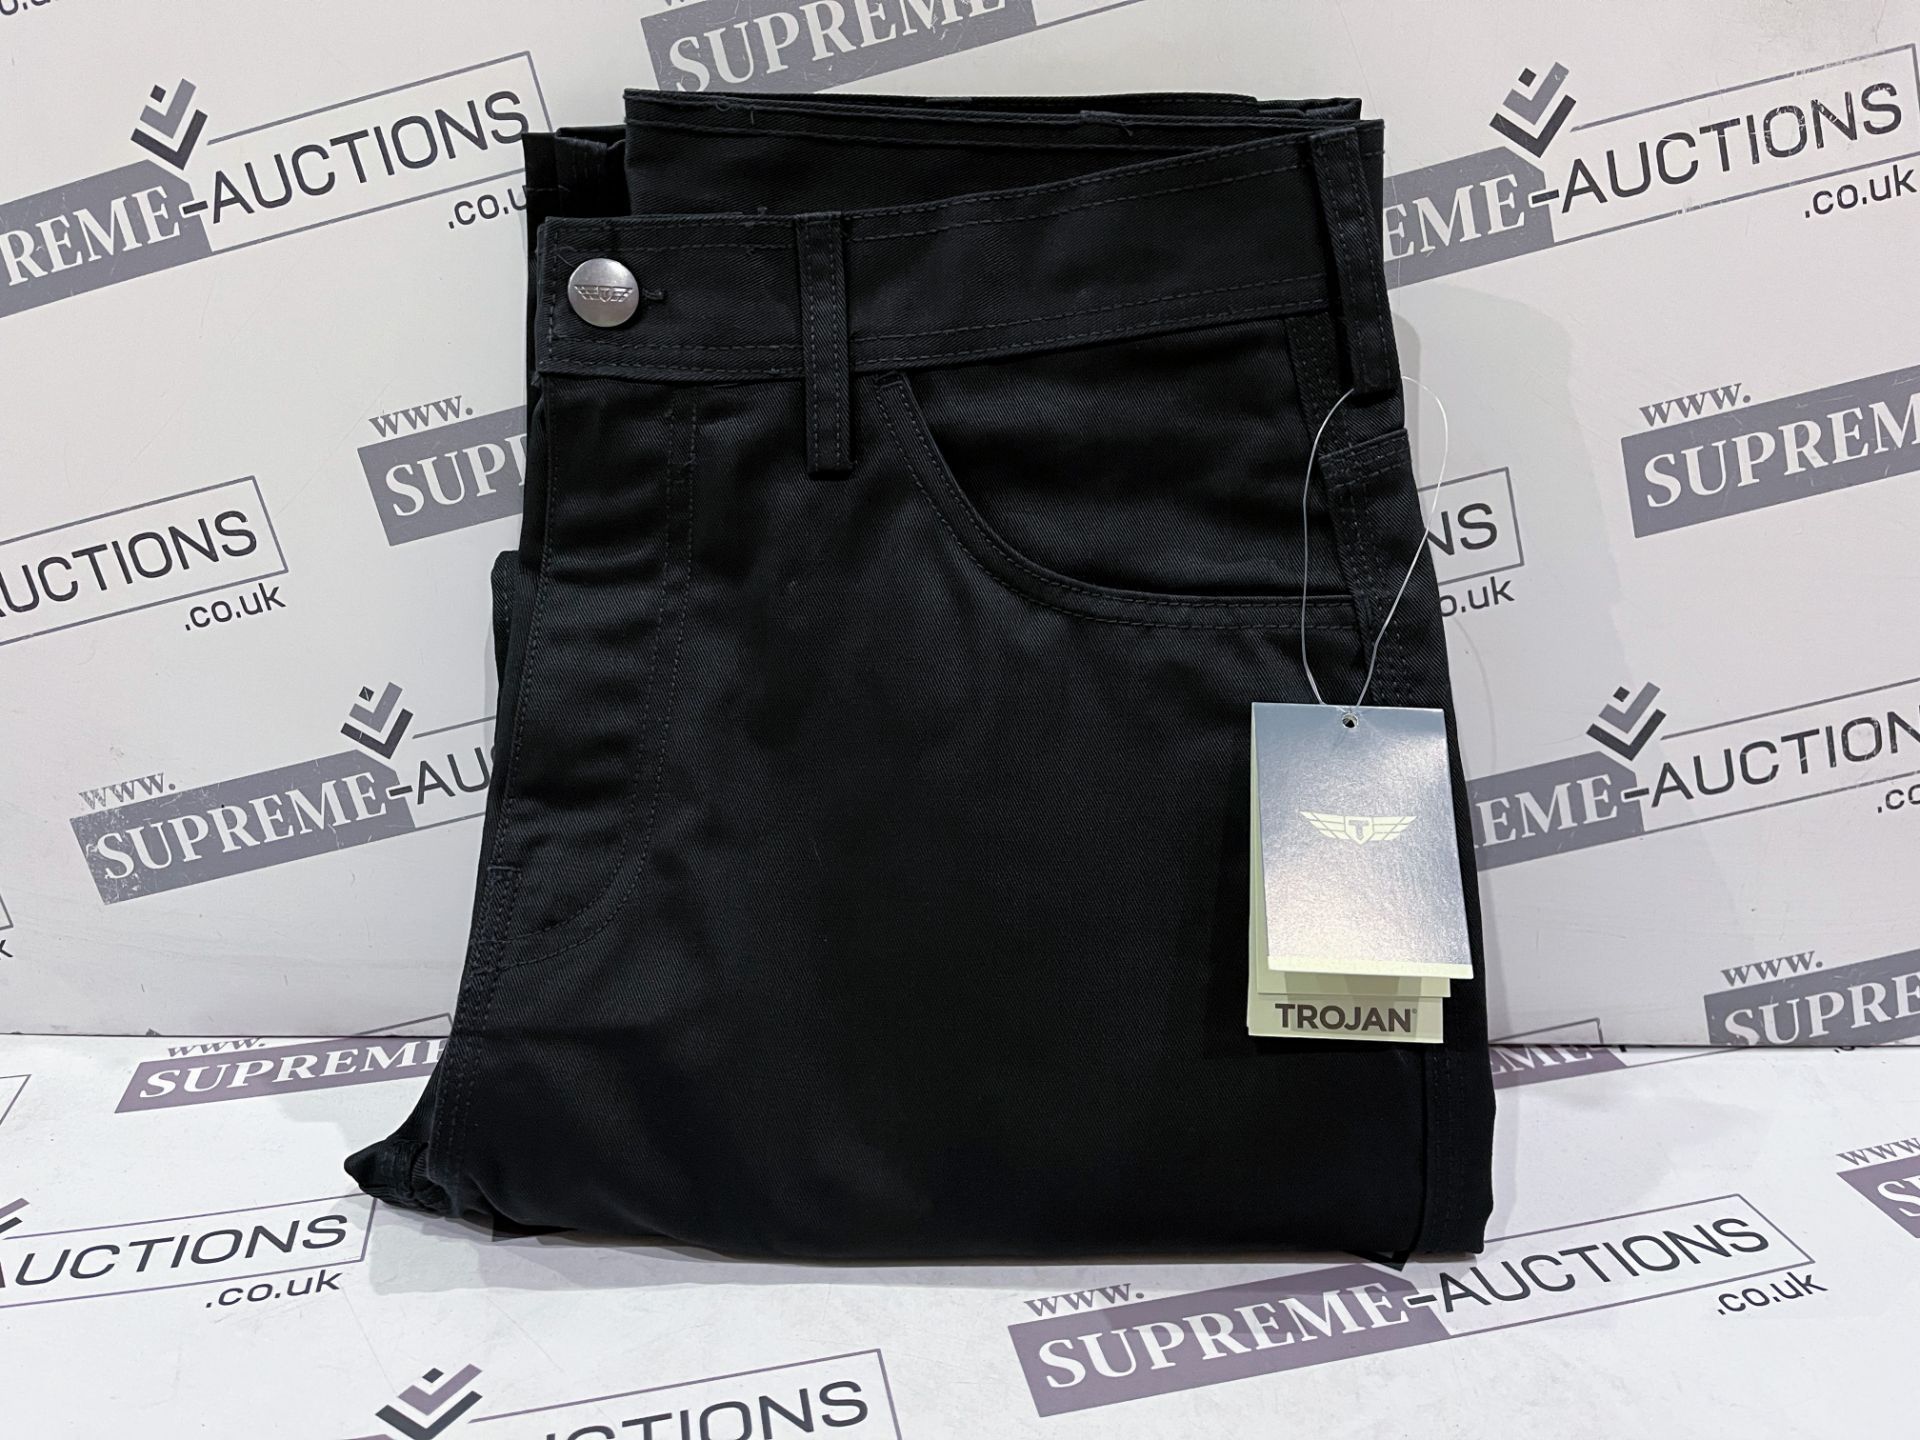 20 X BRAND NEW PROFESSIONAL WORK TROUSERS SIZE 40 R10-7